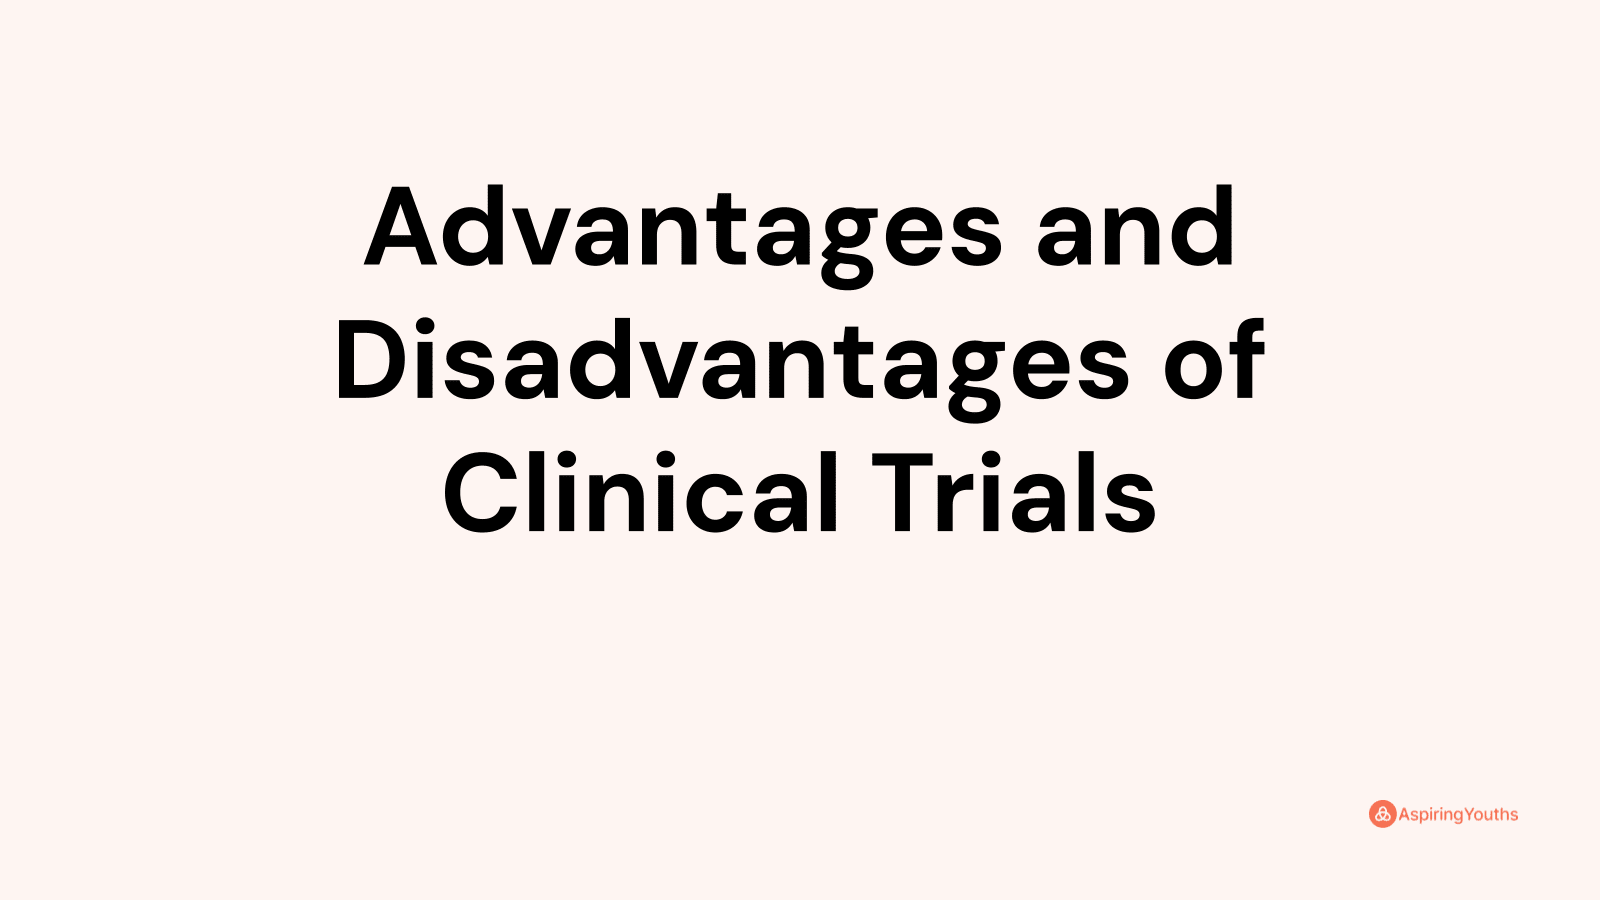 Advantages and disadvantages of Clinical Trials